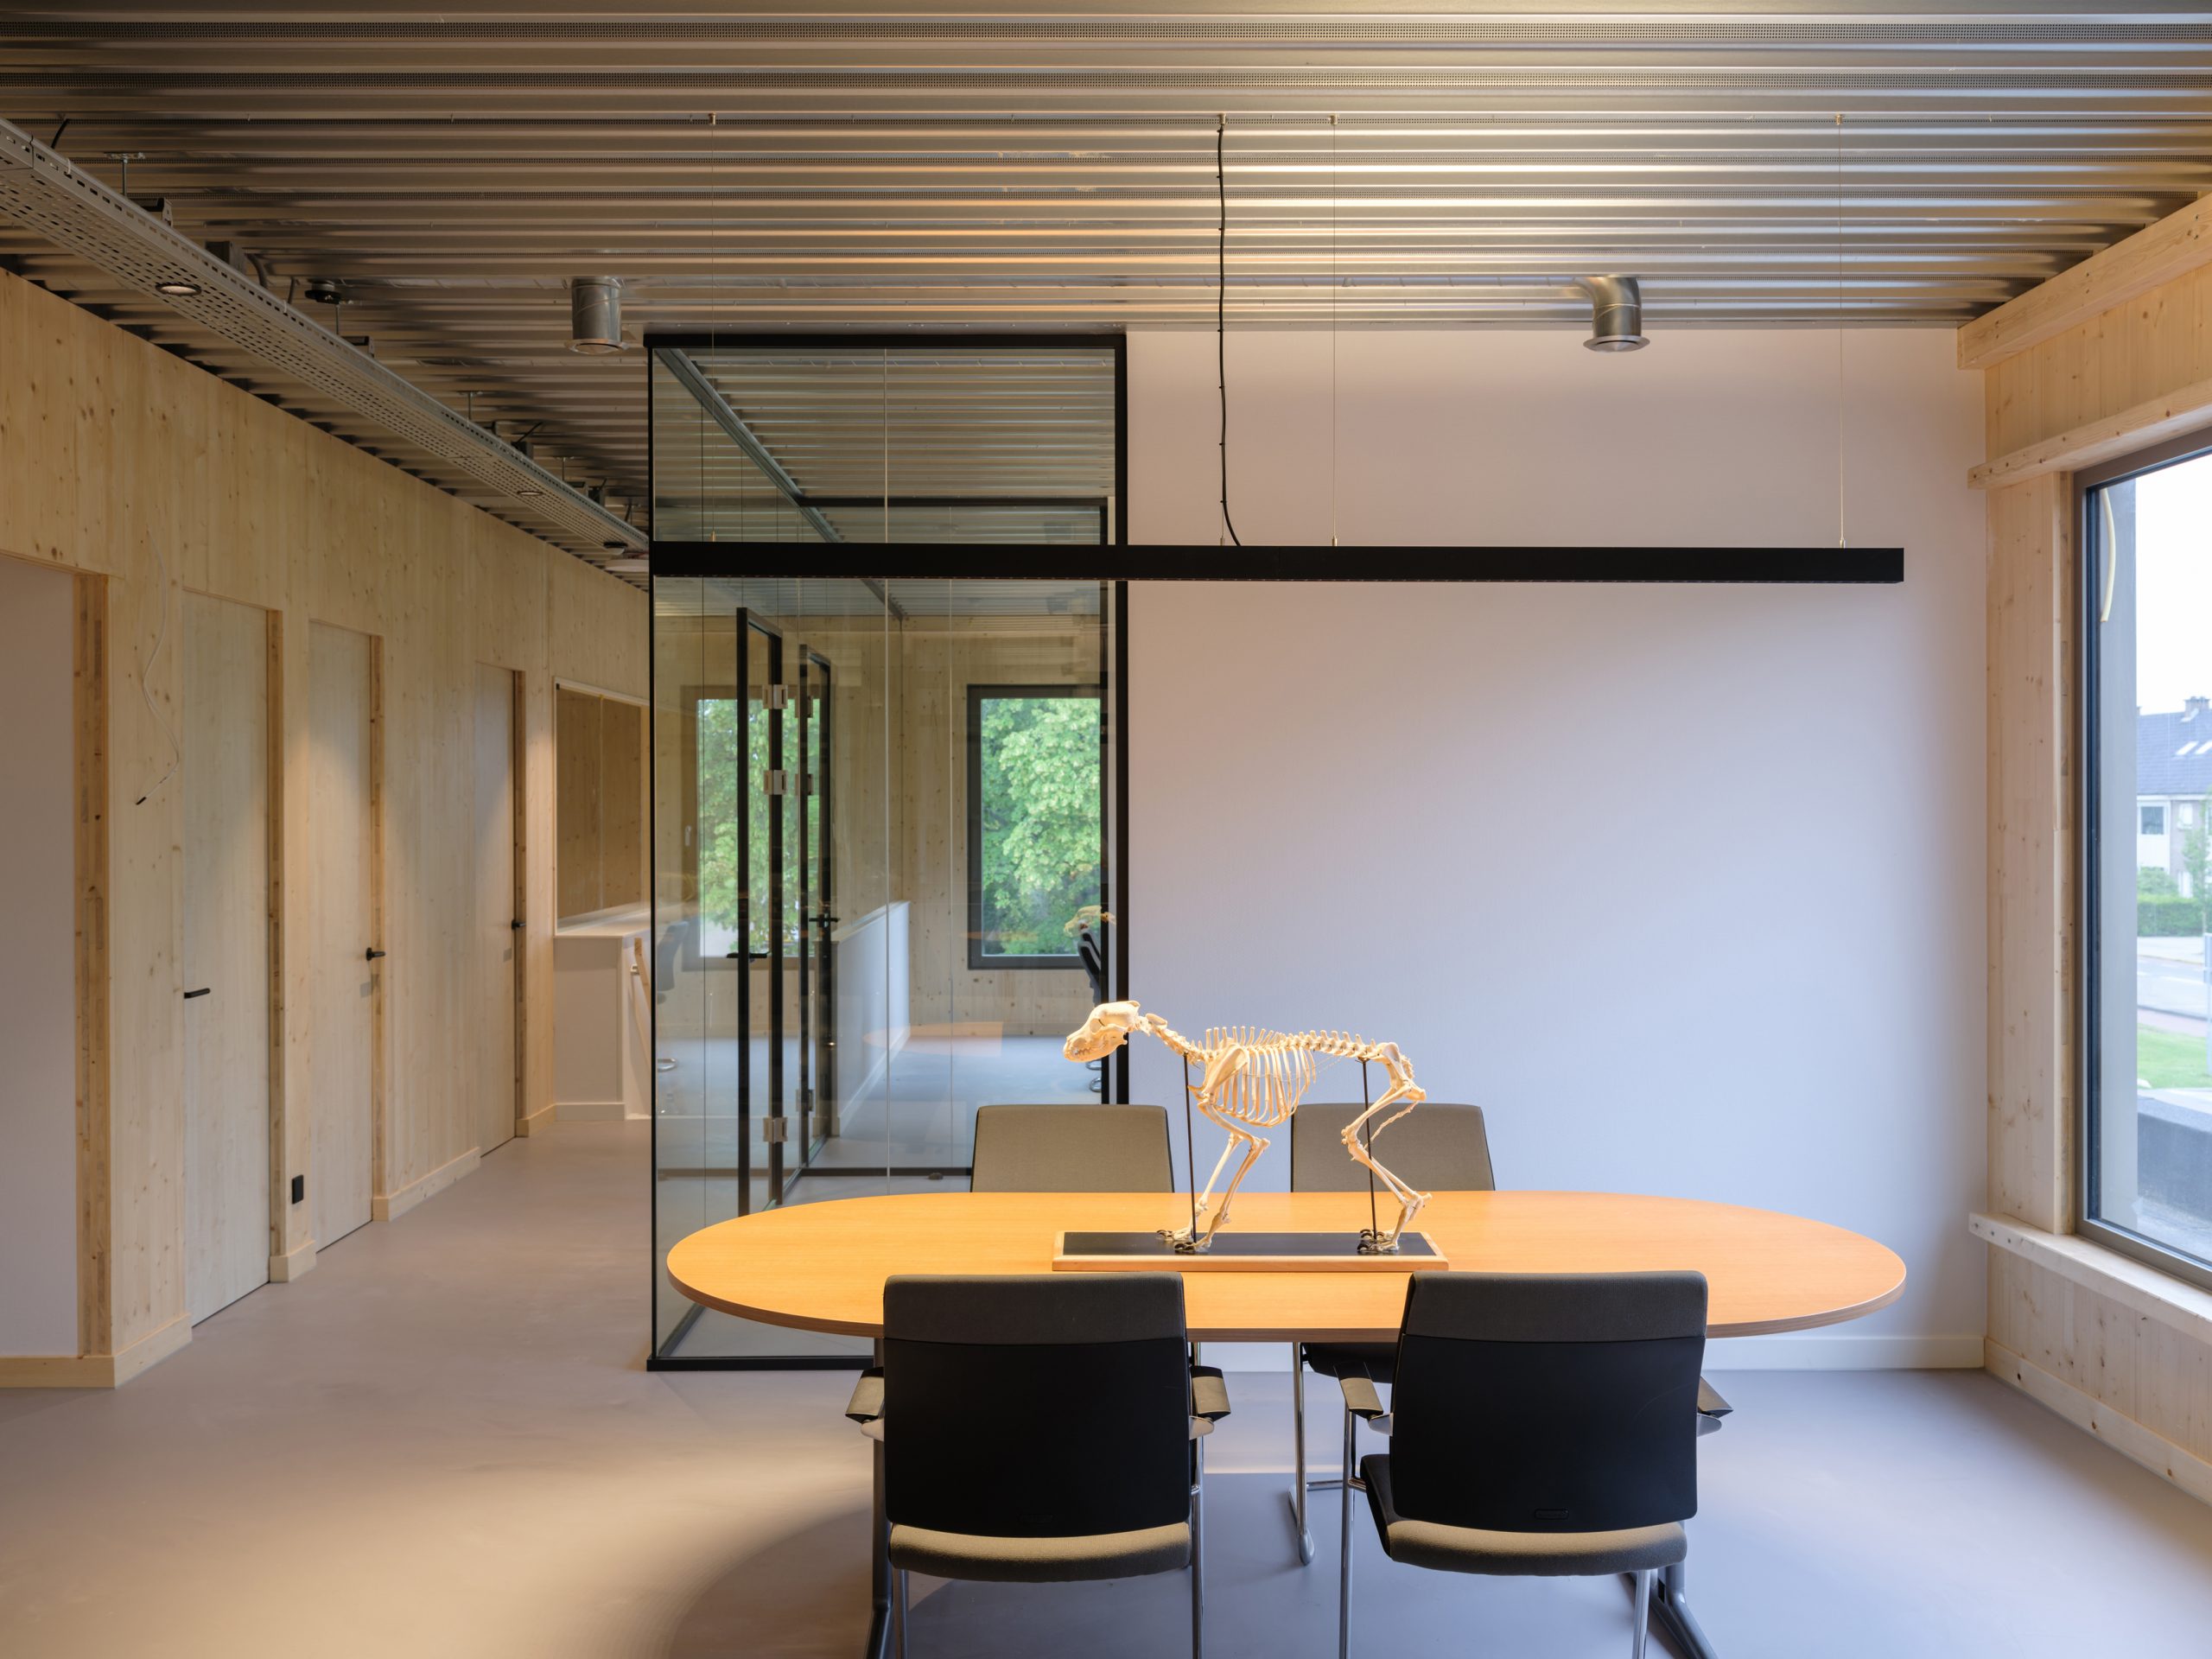 Meeting room CLT wood black table_wooden wall_galvanized steel_big windows_by MOST Architecture